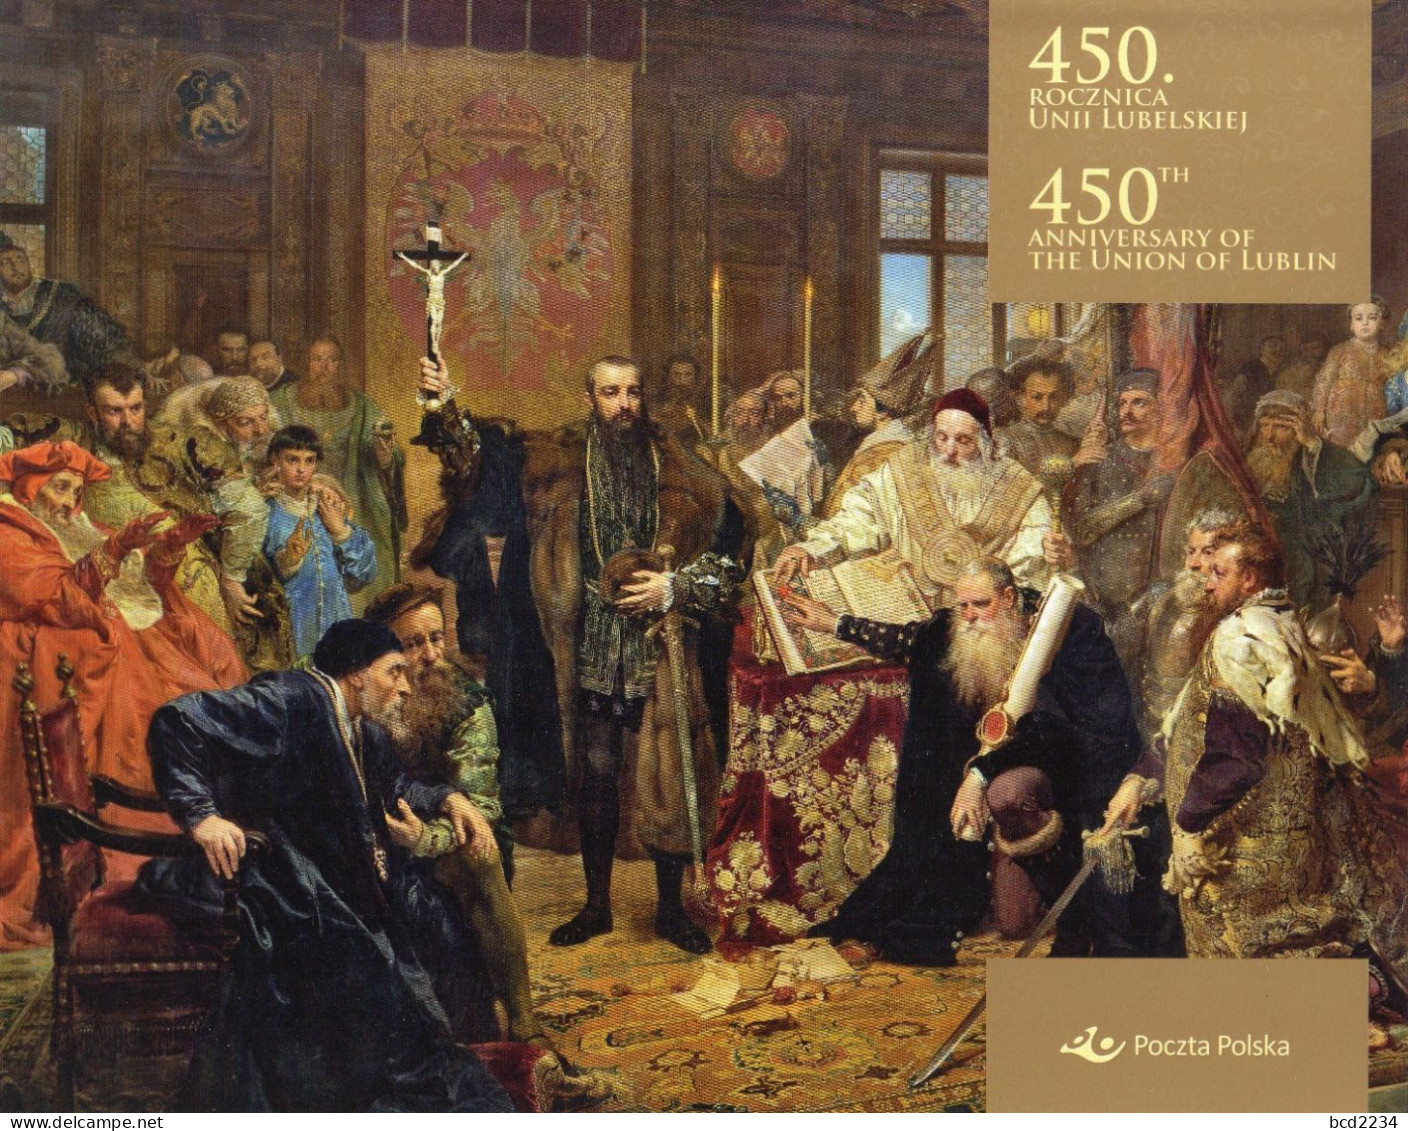 POLAND 2019 POLISH POST OFFICE LIMITED EDITION FOLDER: 450TH ANNIVERSARY OF UNION OF LUBLIN MS LITHUANIA KINGS ROYALS - Covers & Documents